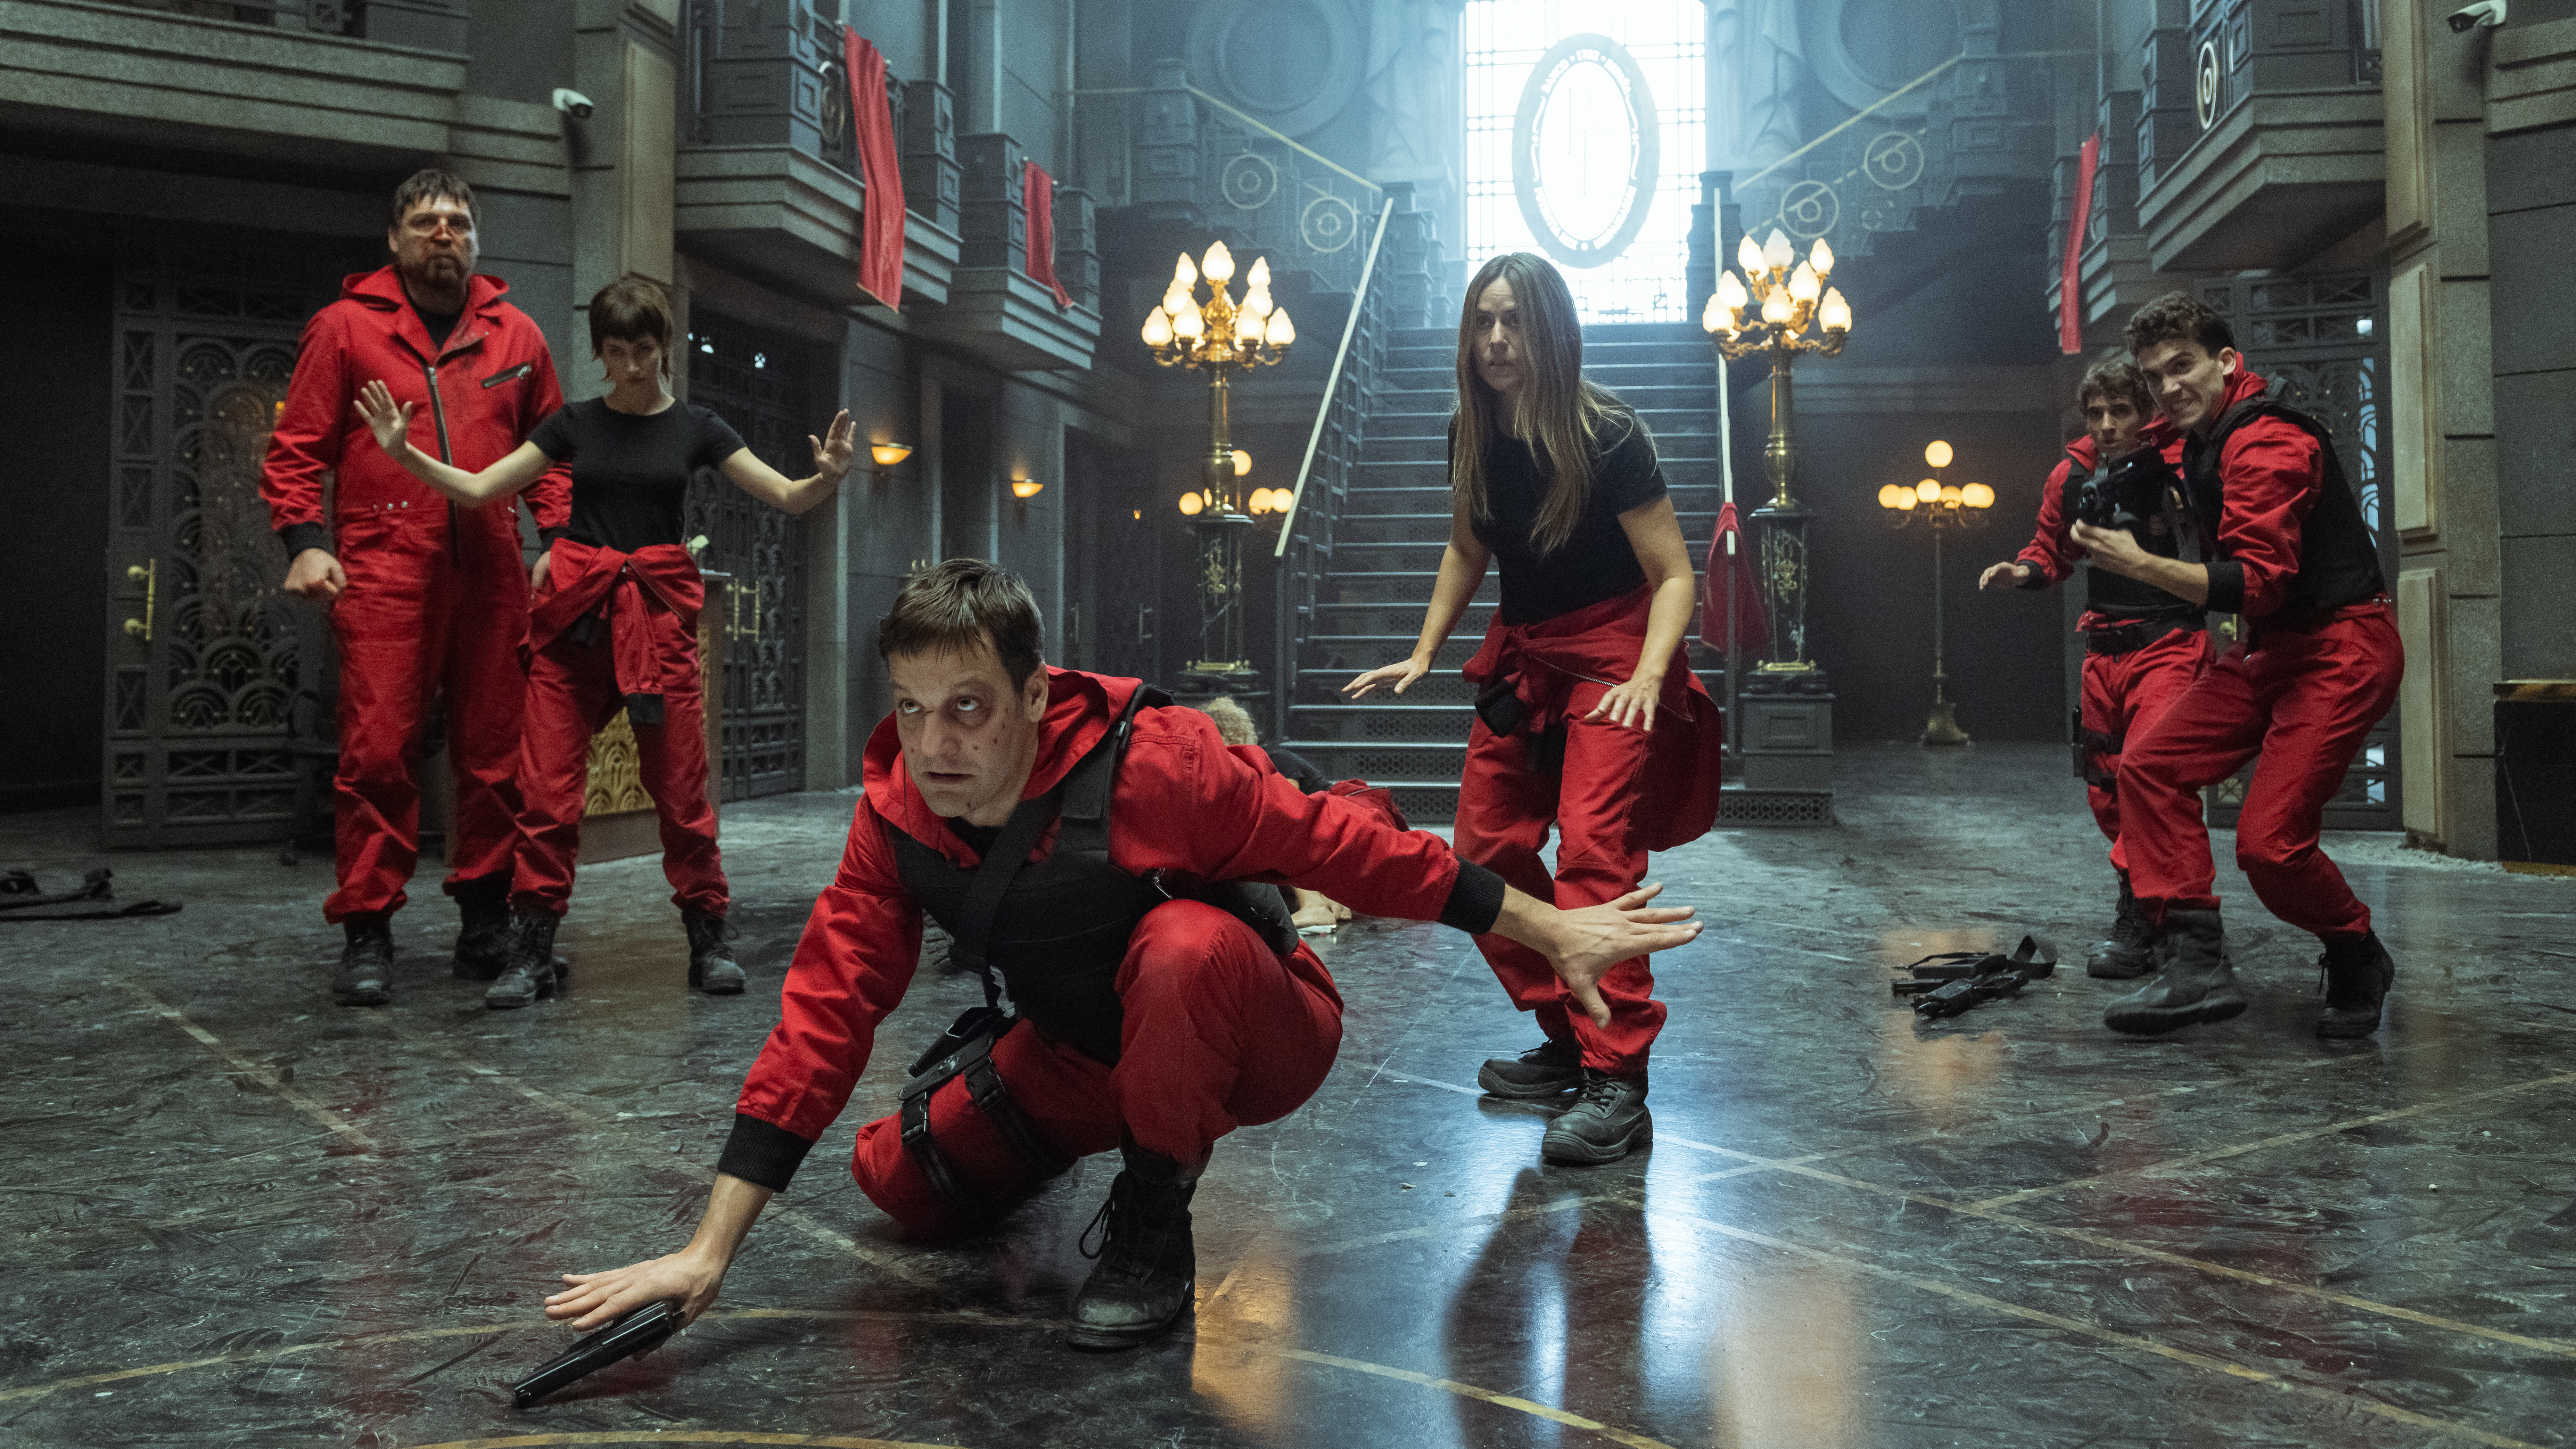 Money Heist Flix Releases First Look Pictures From Season